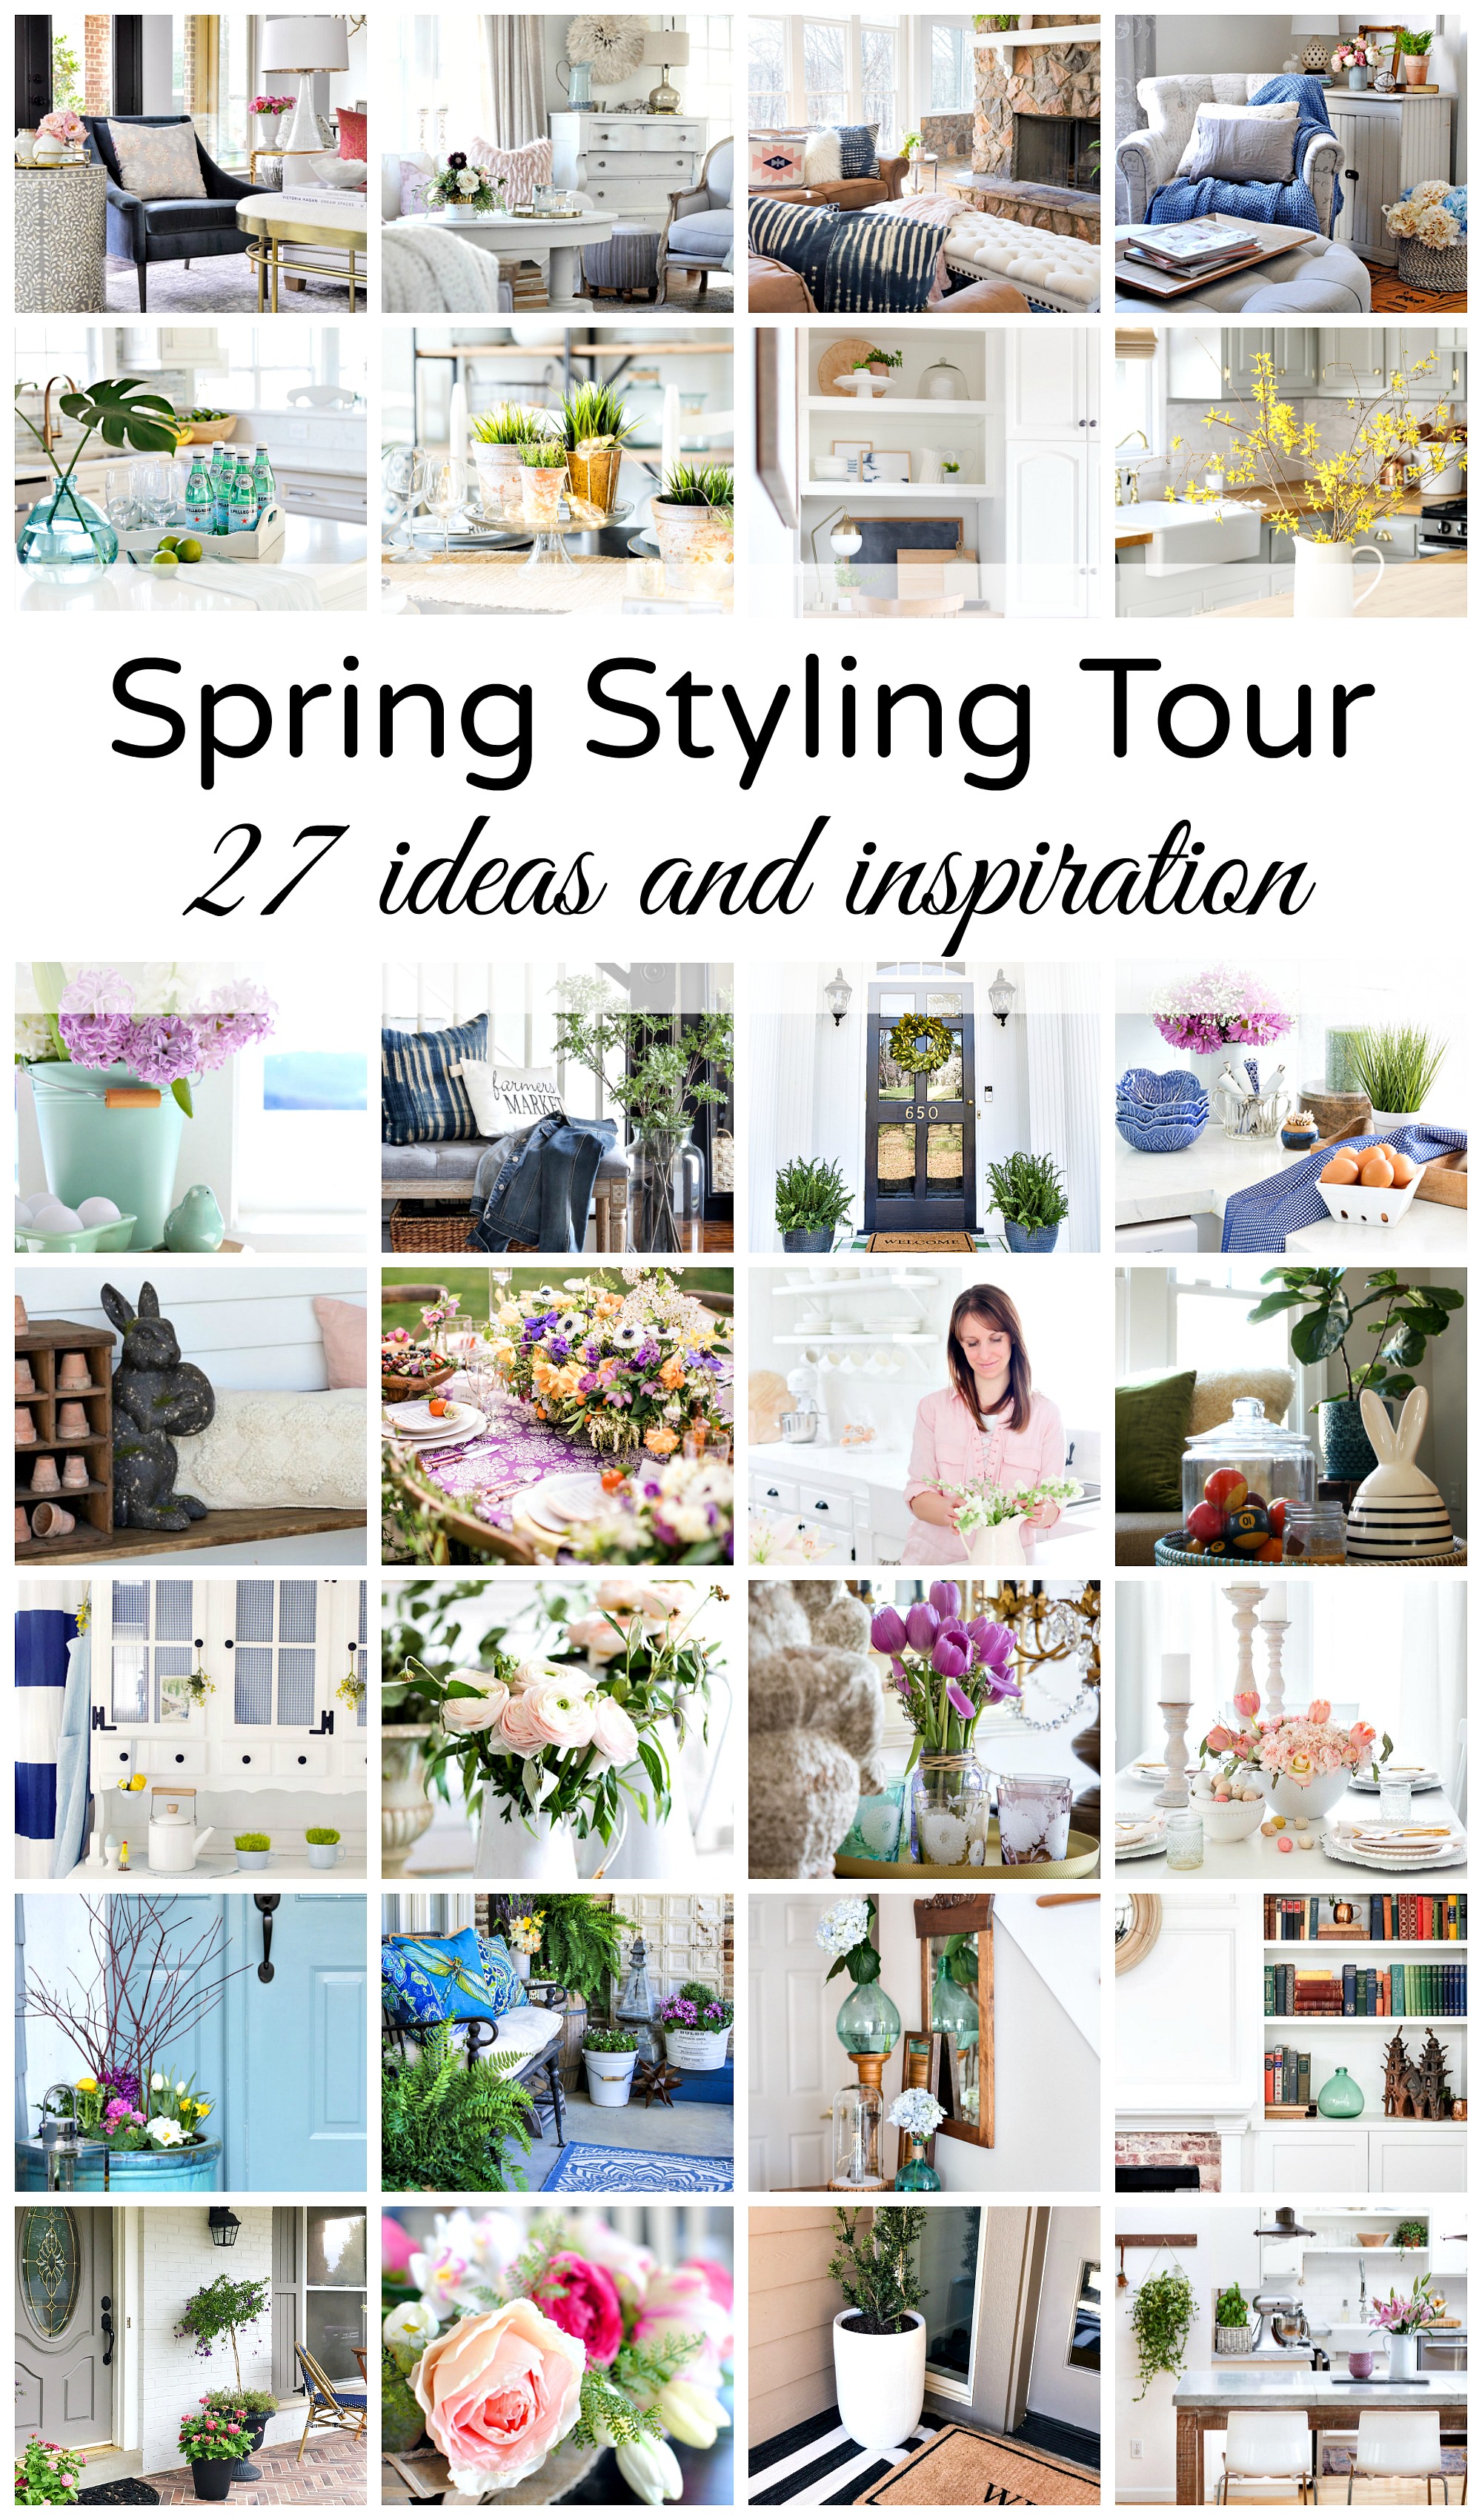 Spring Styling Tour Ideas And Inspiration.